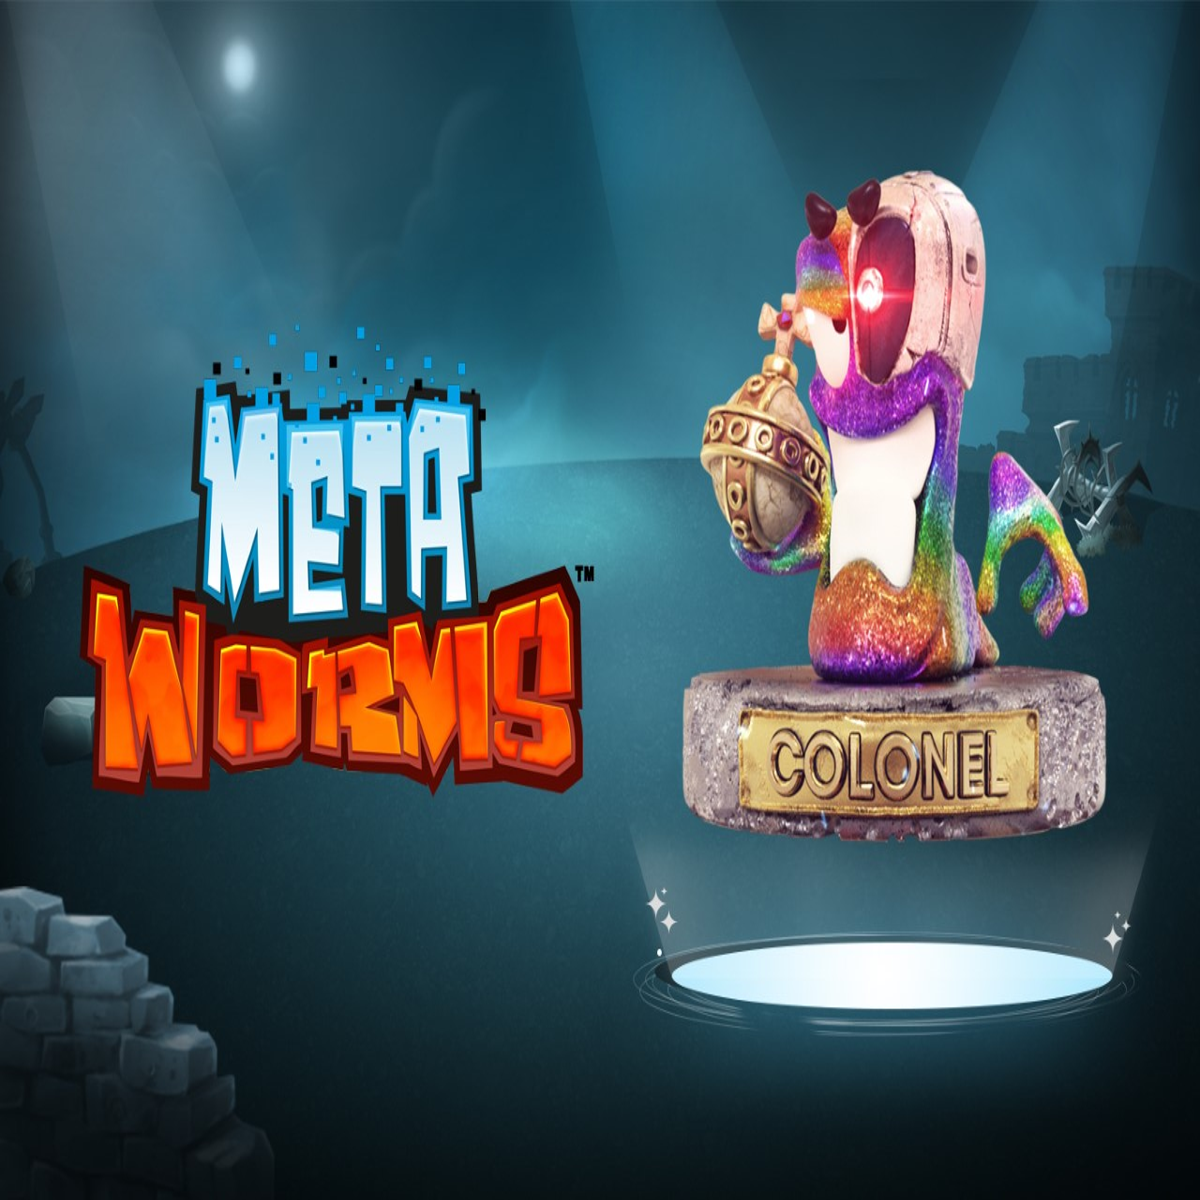 Metaworms NFT Project Cancelled Following Community Backlash